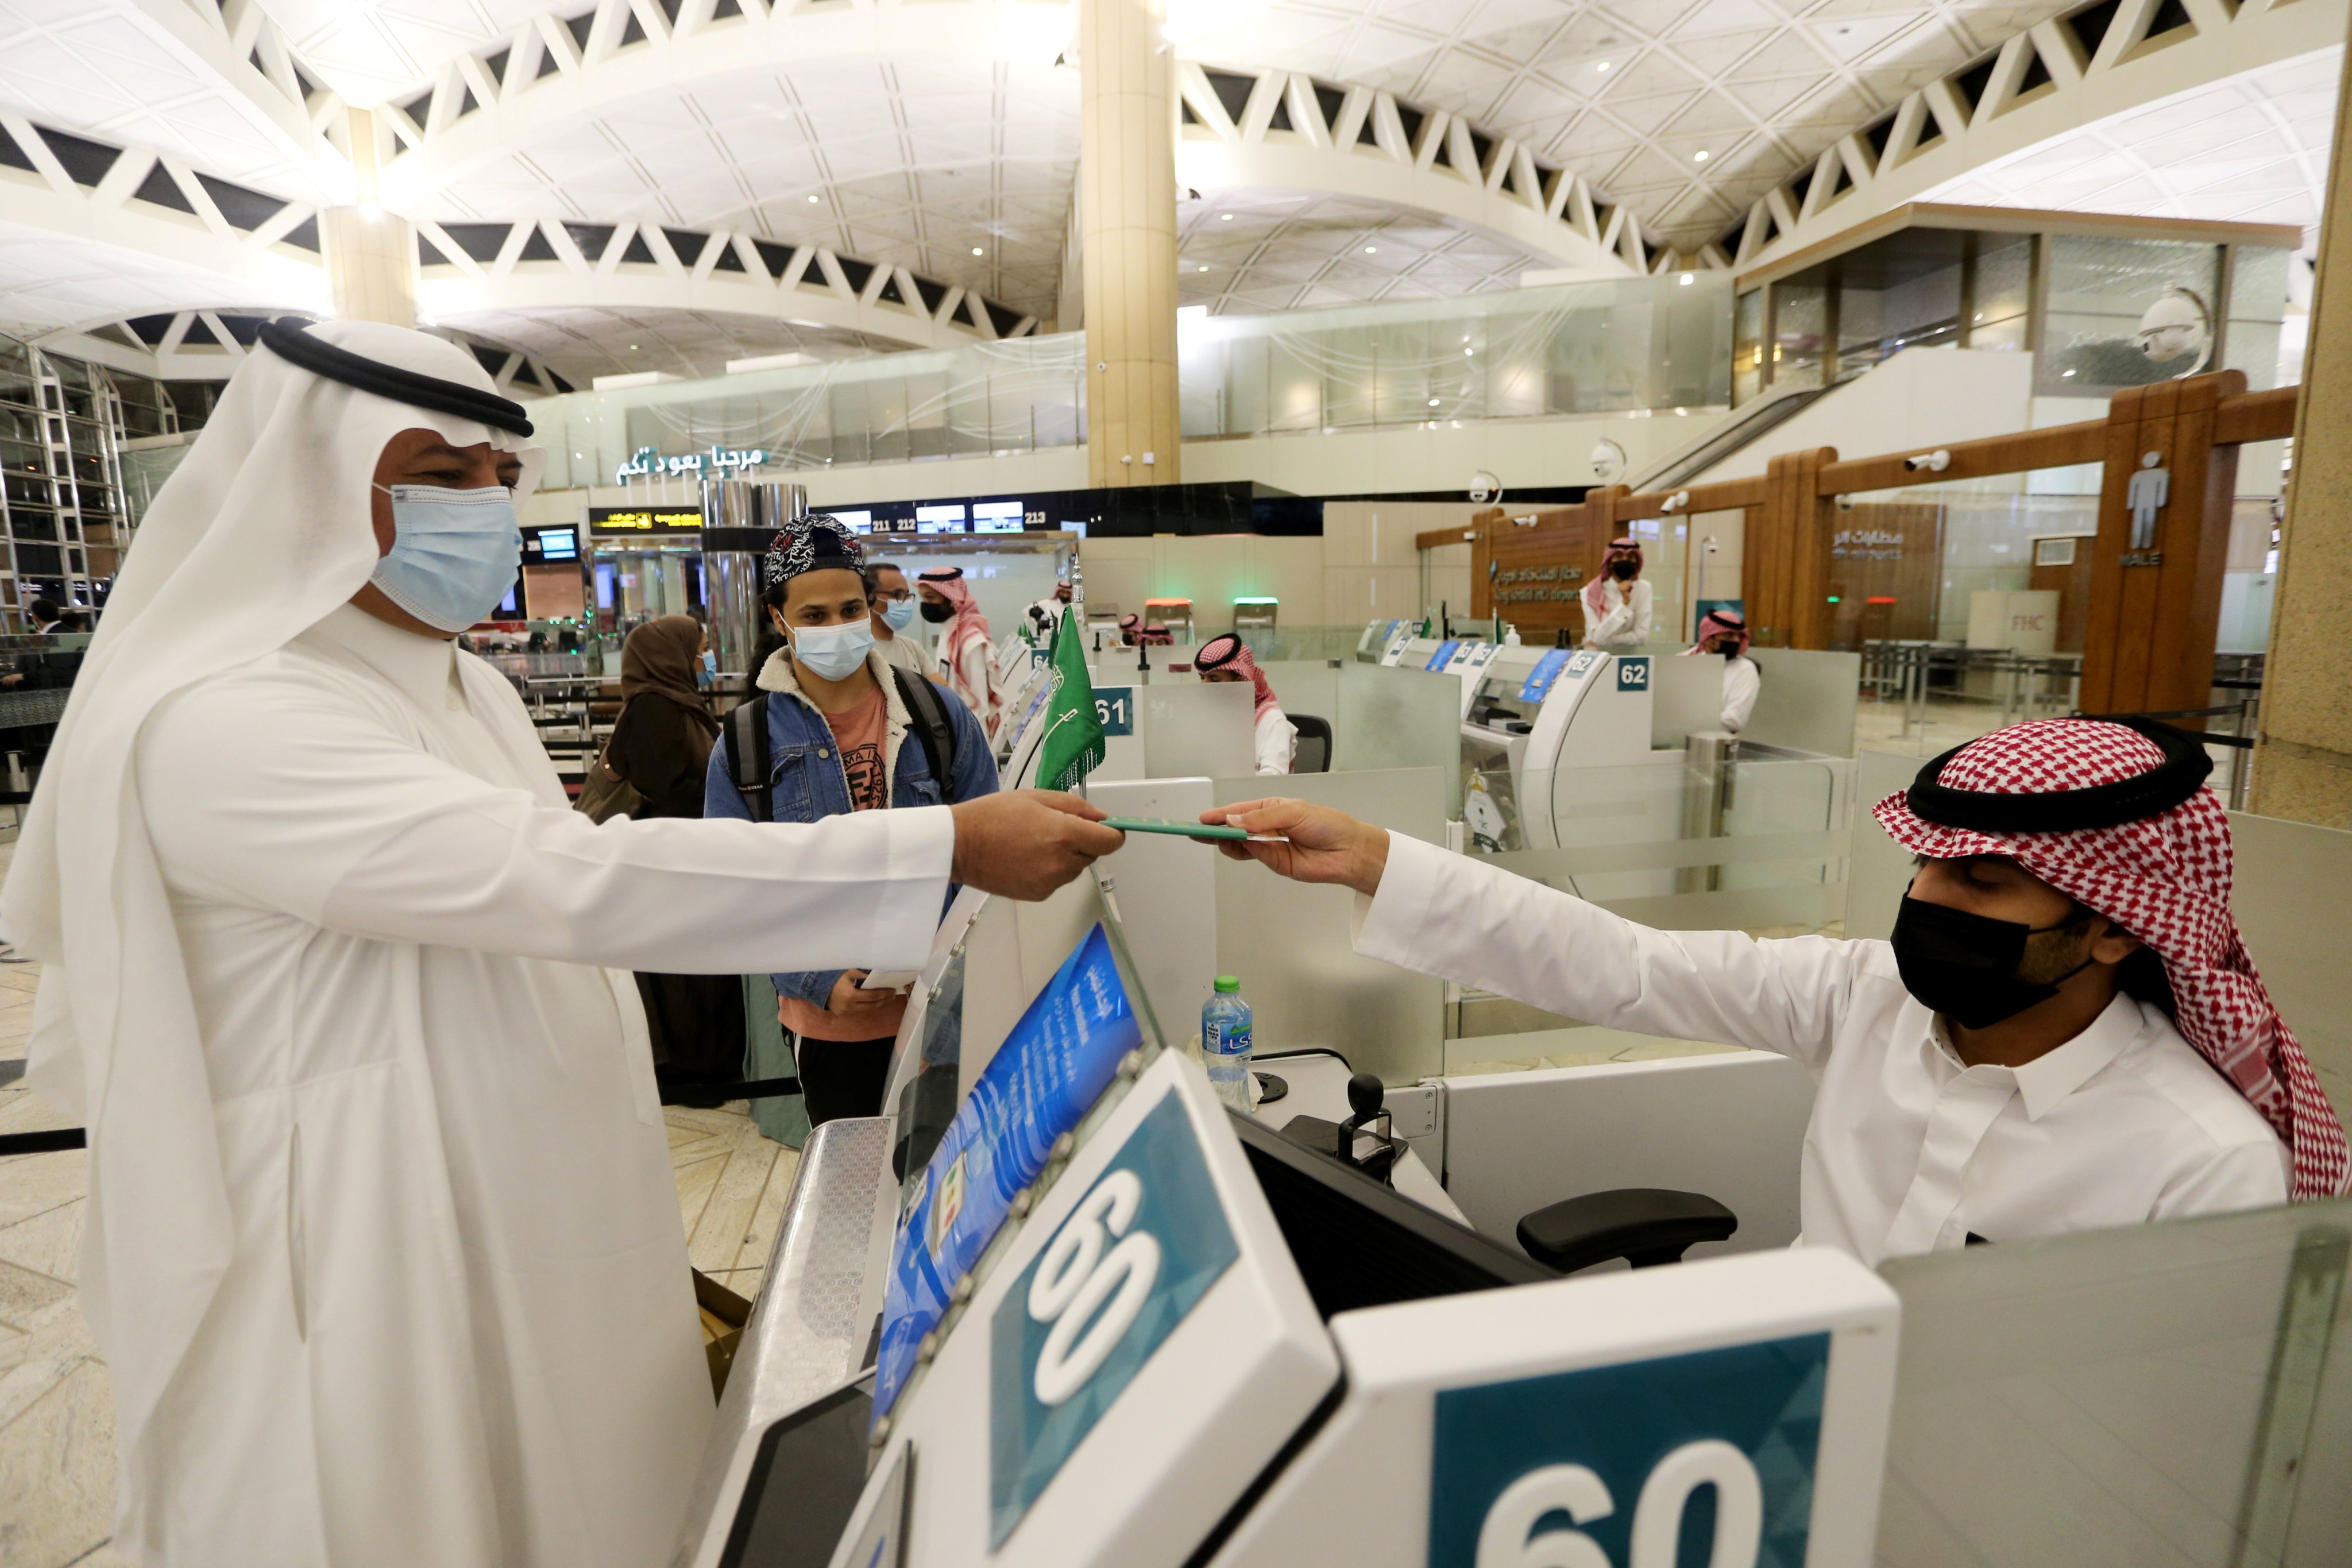 Saudi Arabia officially launched tourist visas for 49 countries, including China, in September 2019. Photo: Reuters